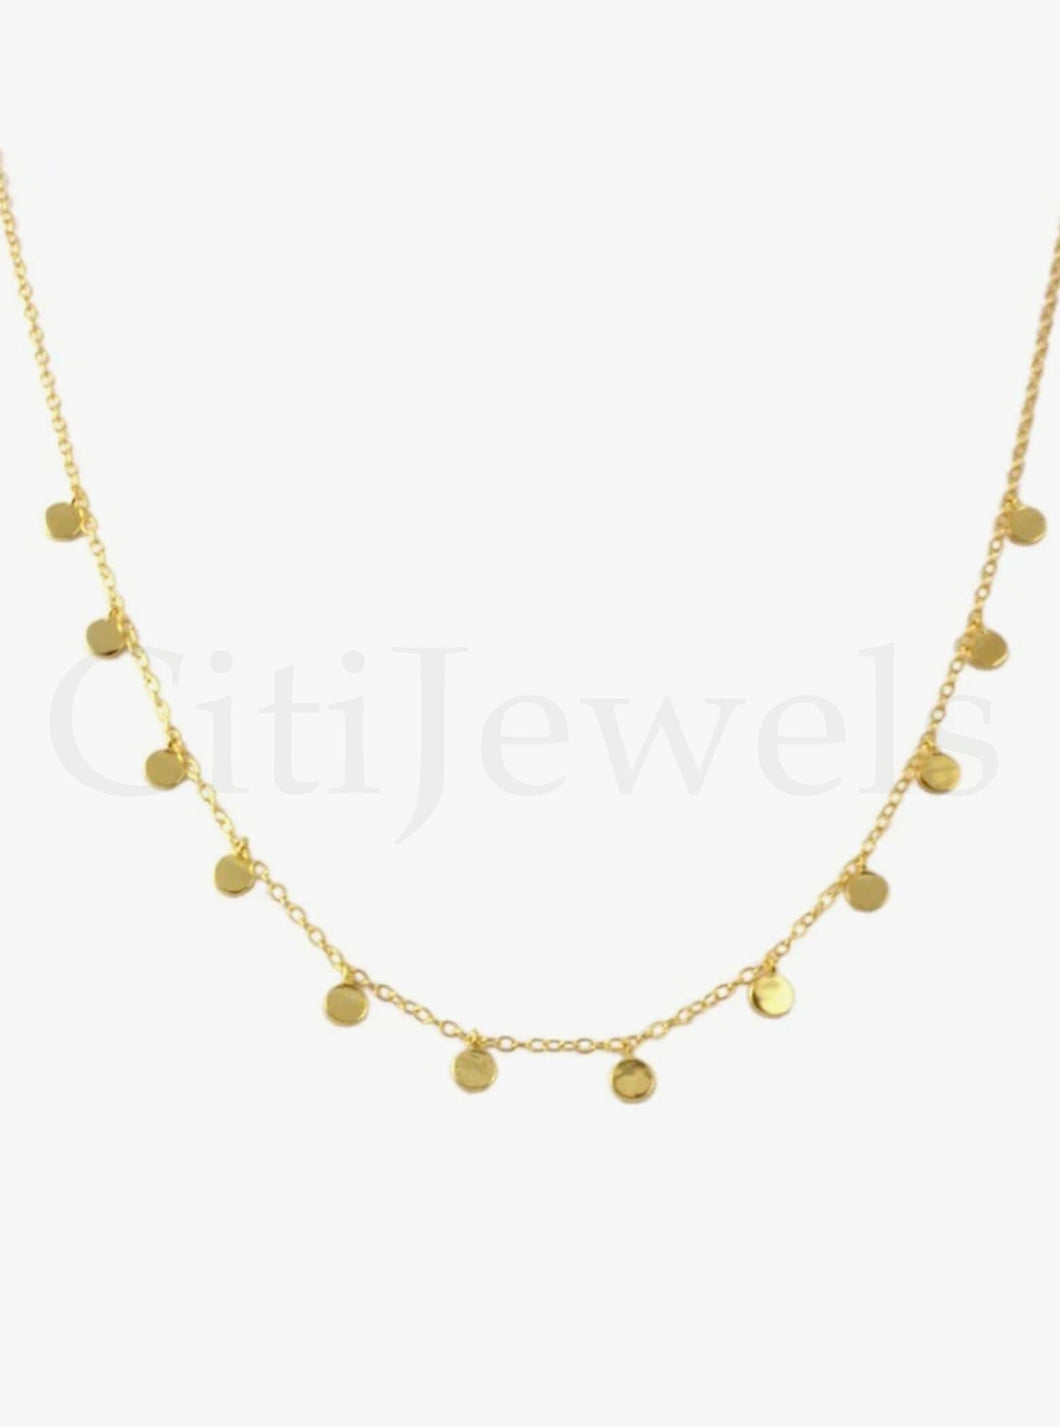 gold disk necklace